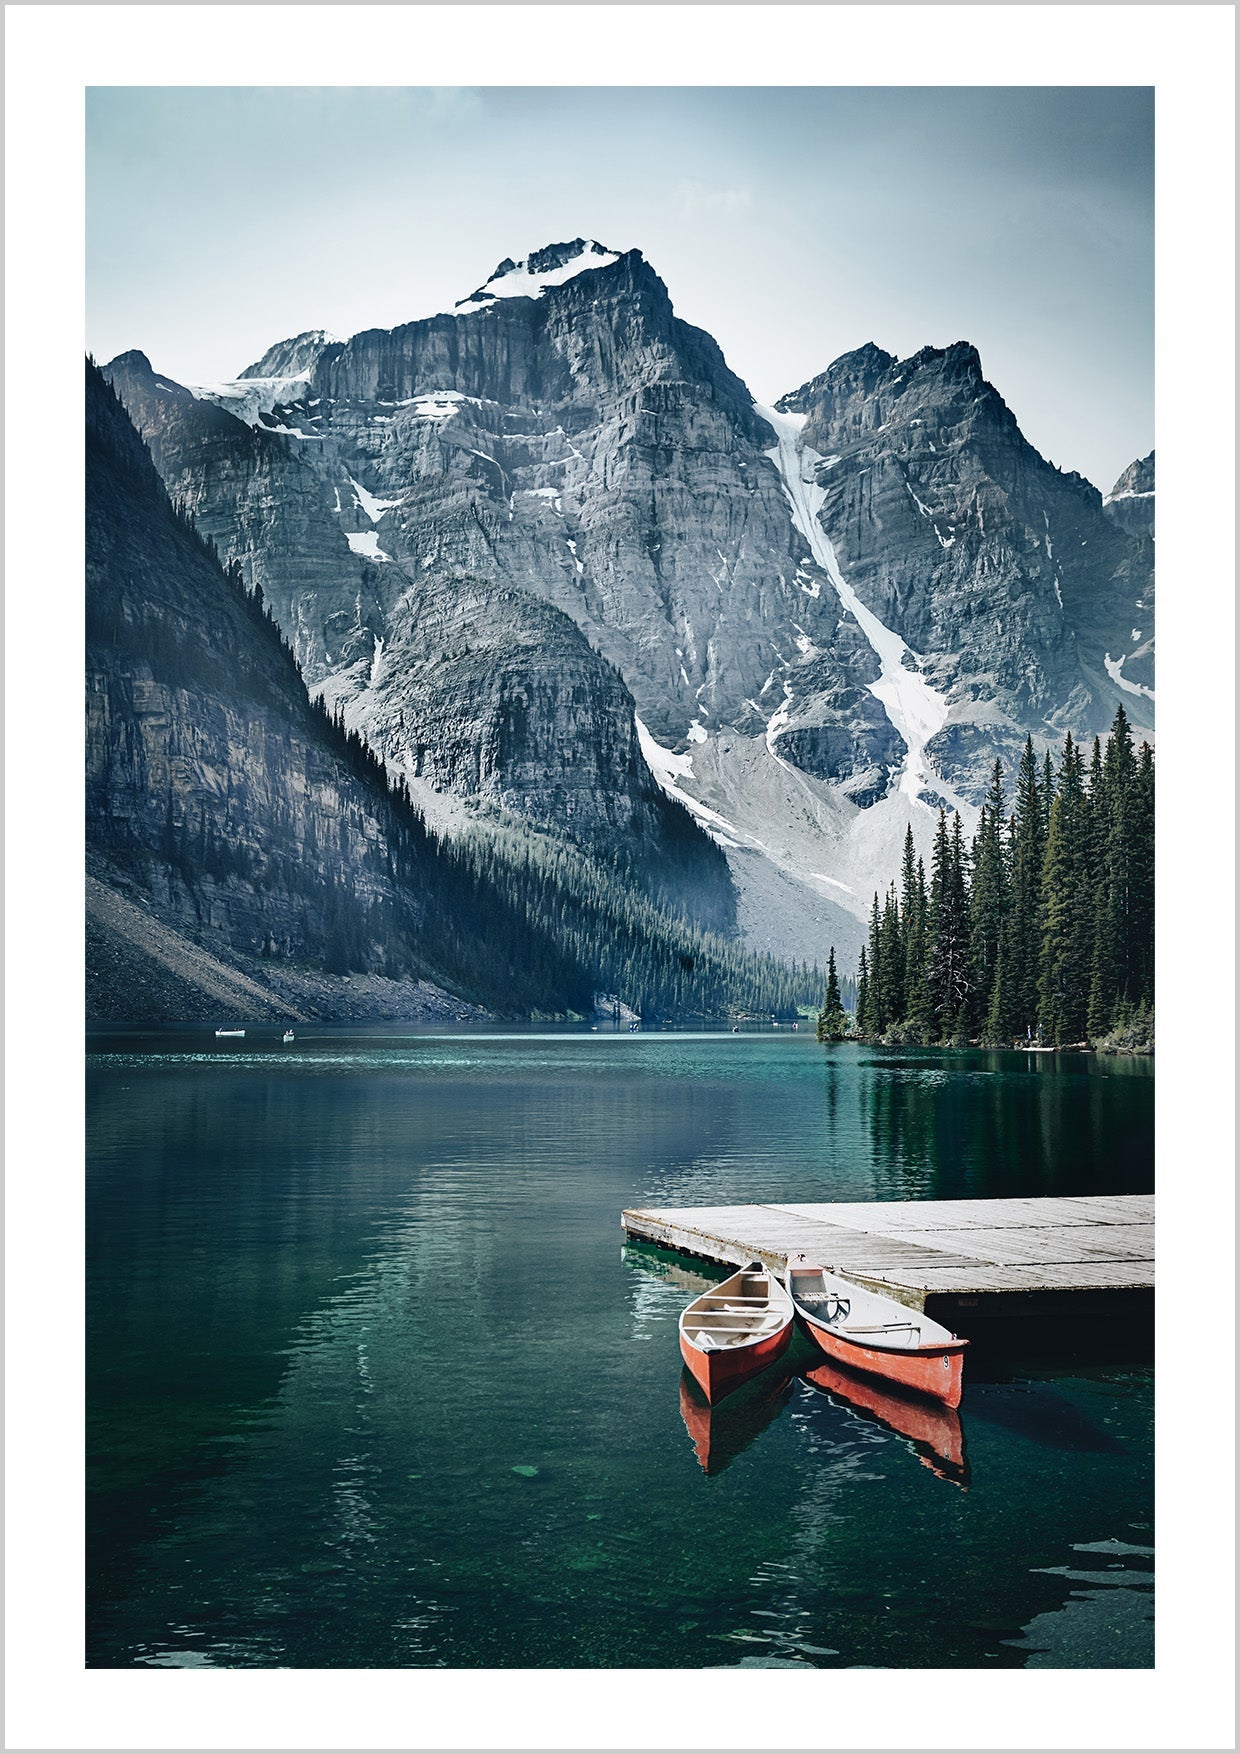 Nature poster with a photographic motif of two red canoes resting on a picturesque wooden pier on a quiet lake. On the side of the clear-blue lake, tall, ice-clad mountains are towering which is reflected beautifully on the still water surface.